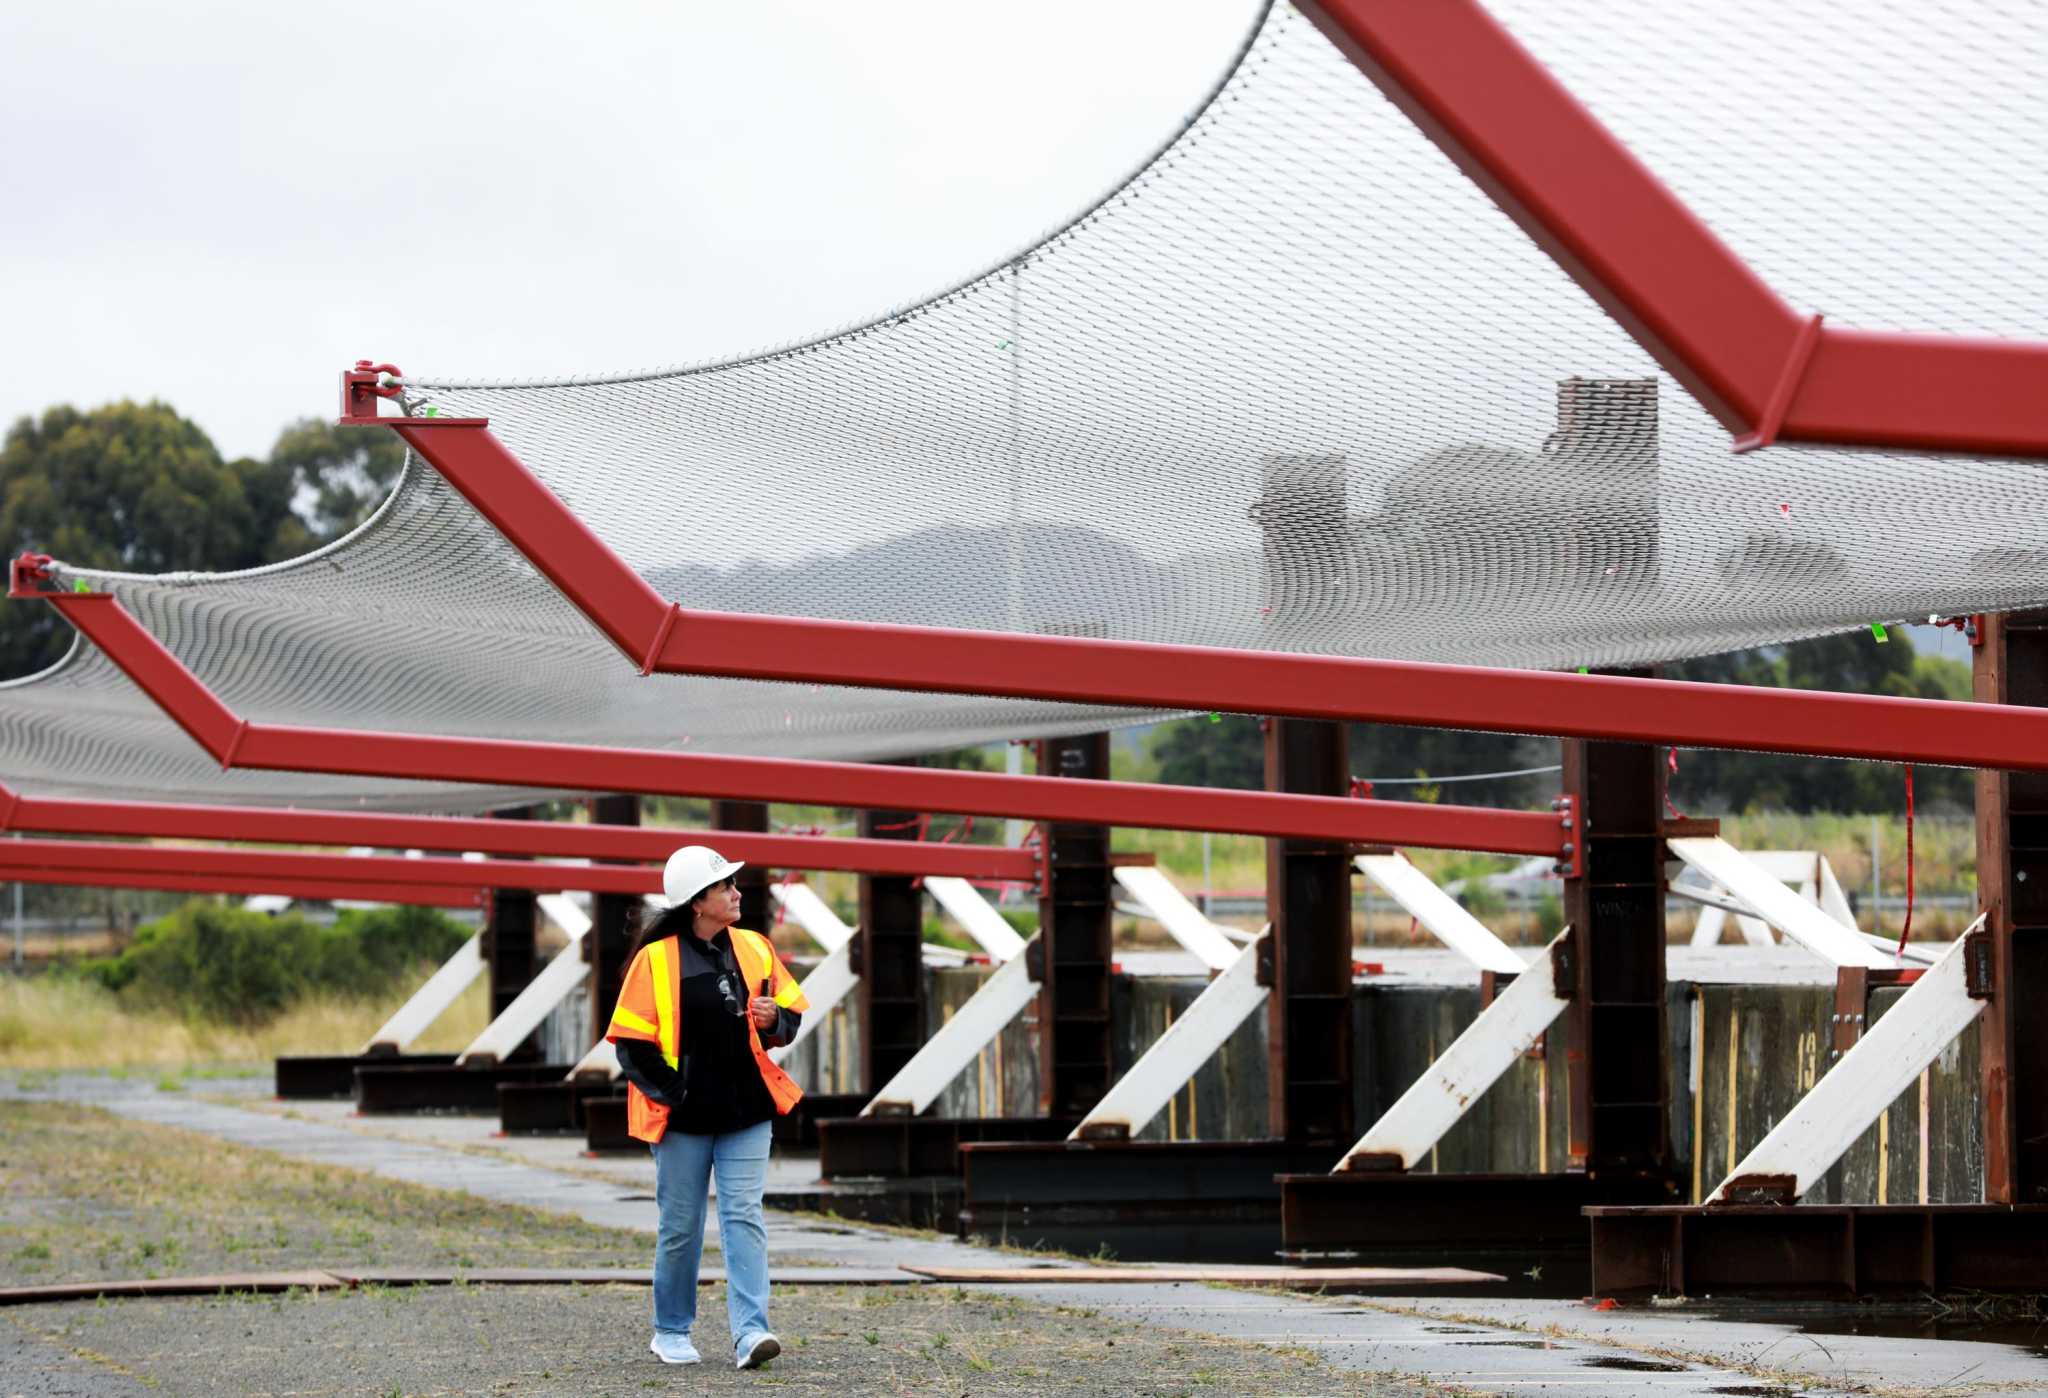 Here's when the Golden Gate Bridge suicide barrier may finally be